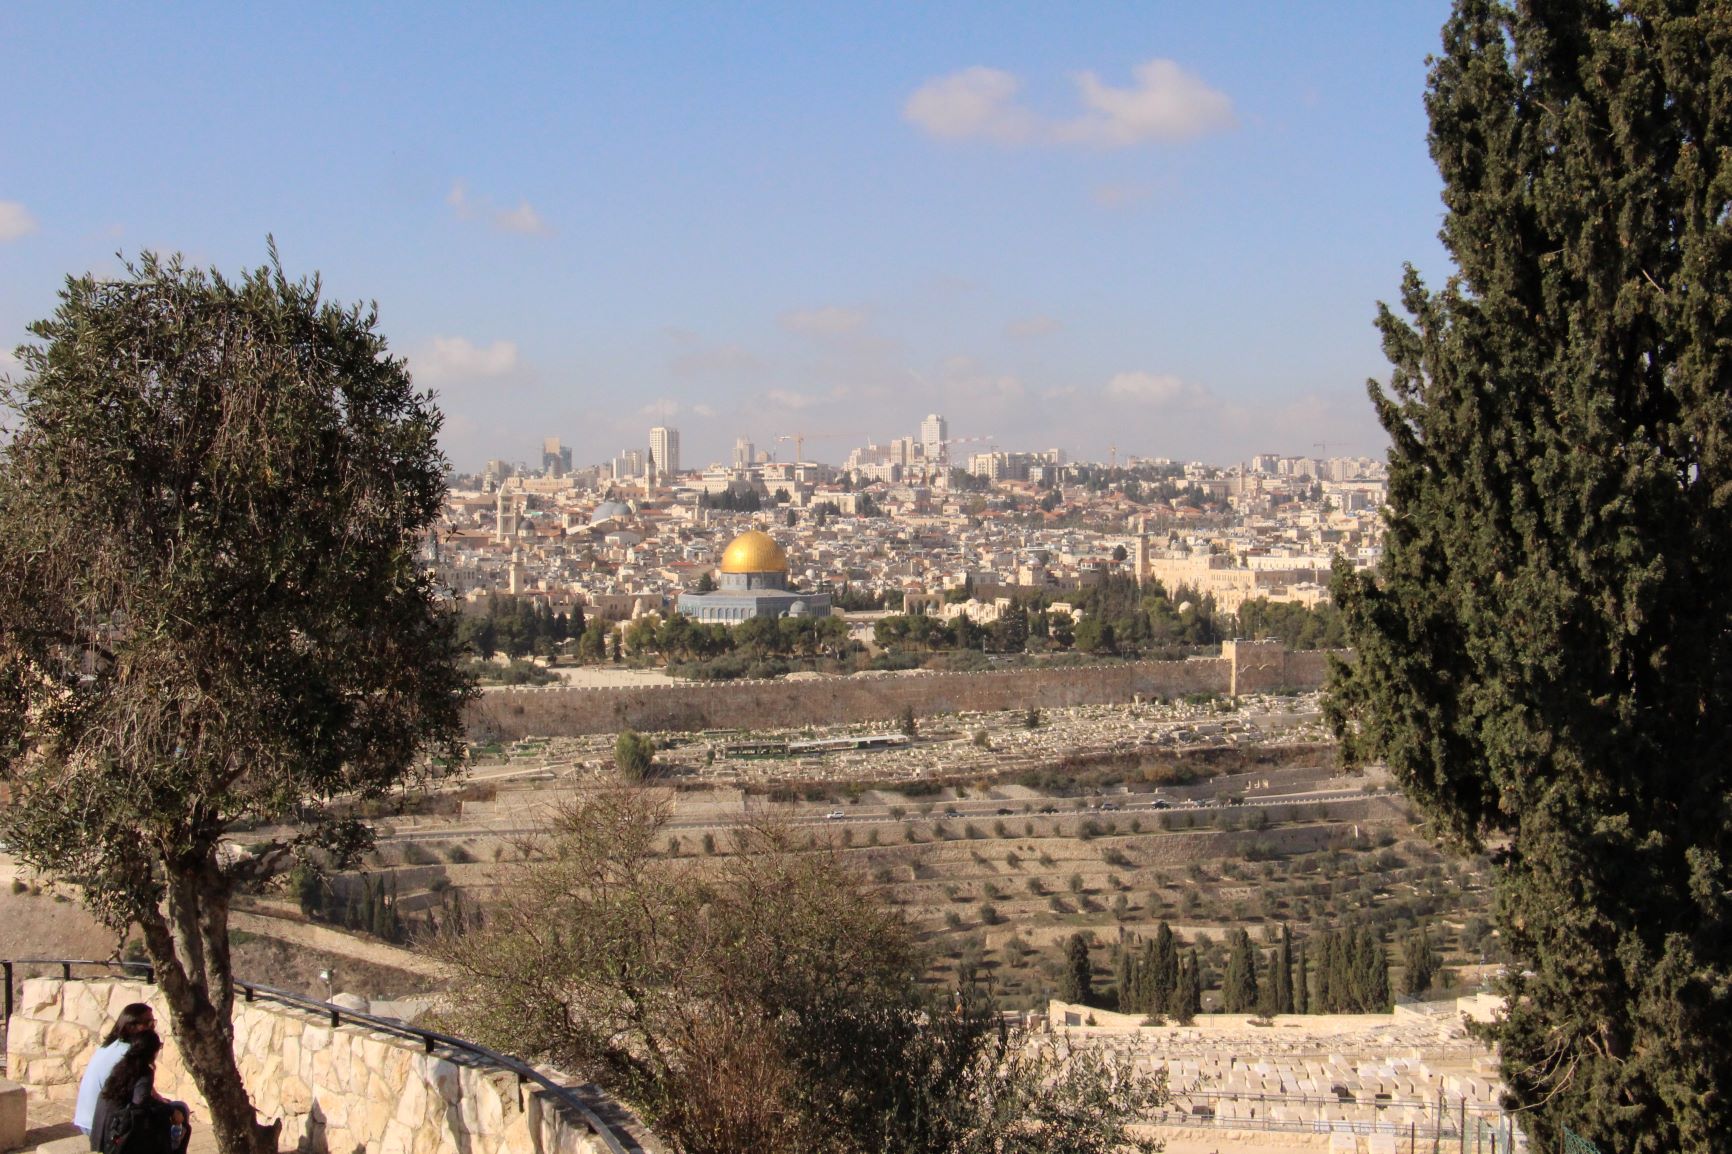 Mount of Olives yesterday and today